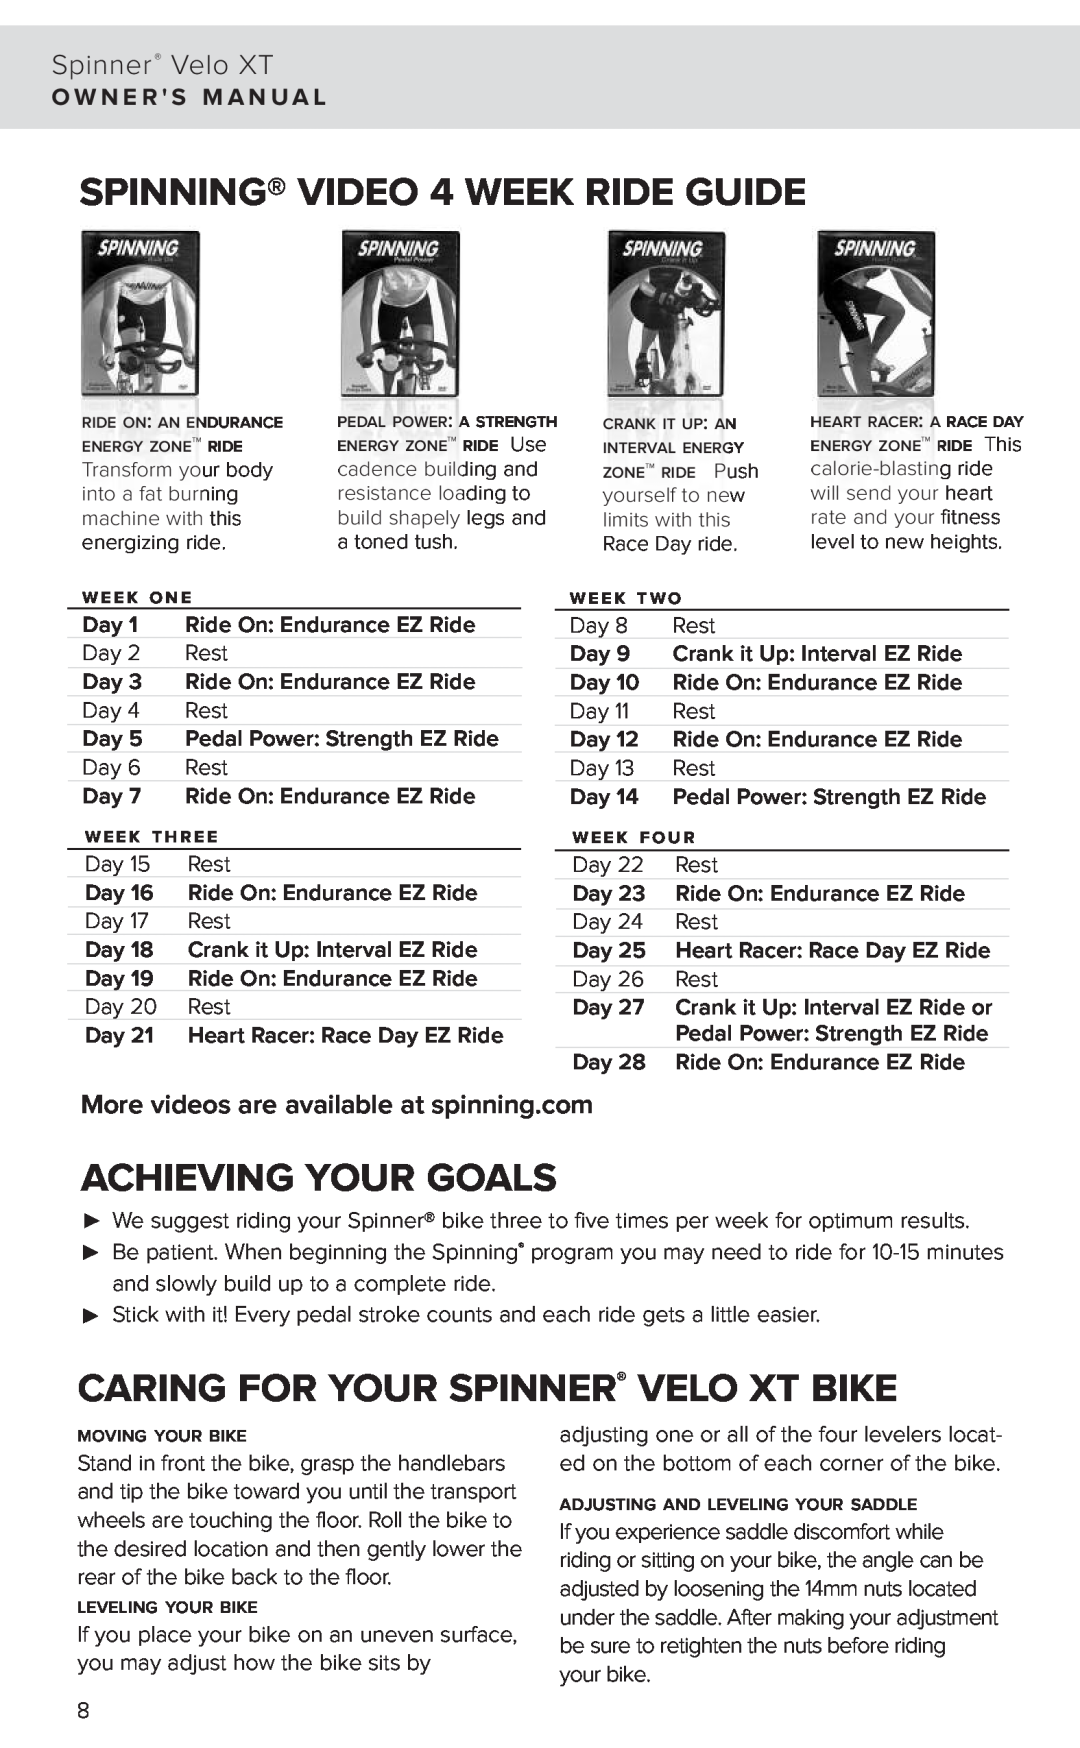 Star Trac 7040 manual SPINNING VIDEO 4 WEEK RIDE GUIDE, Achieving Your Goals, Caring For Your Spinner Velo Xt Bike 